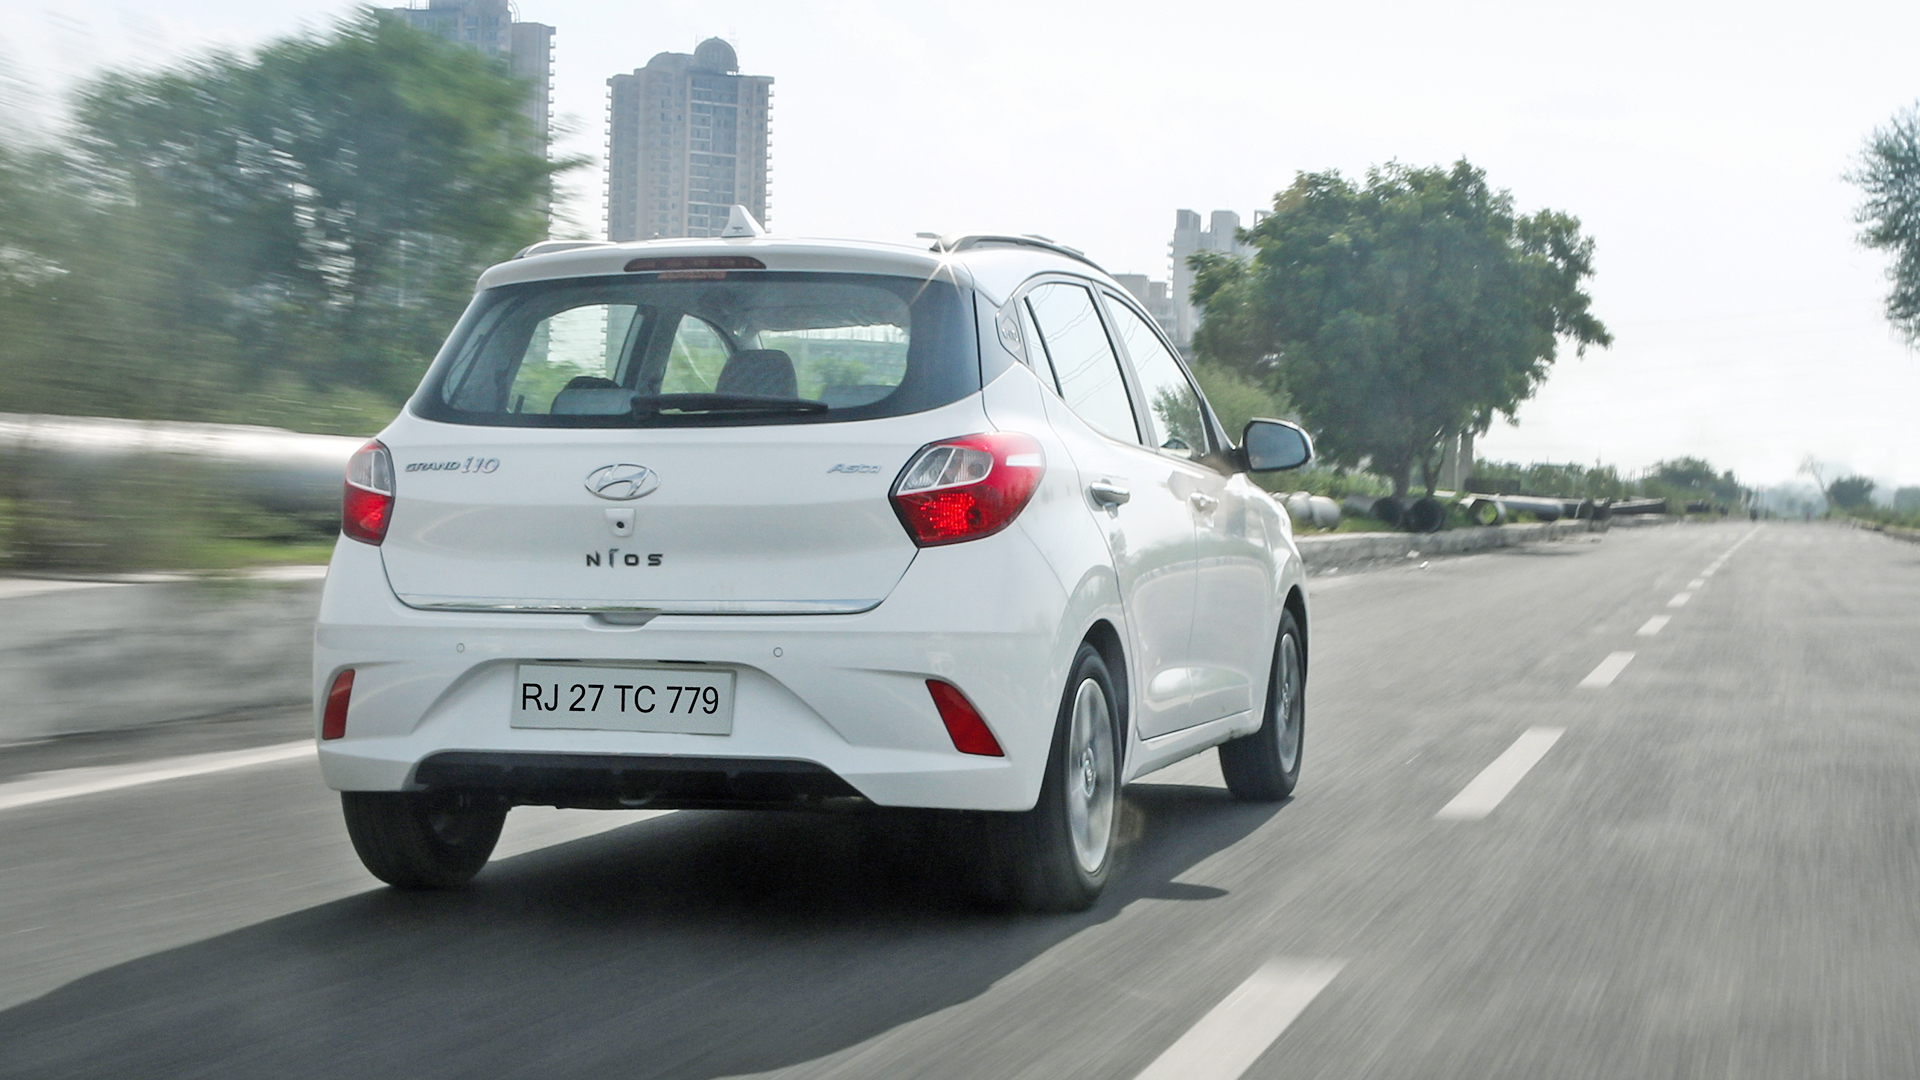 Hyundai Grand i10 NIOS 2020 Magna Petrol - Price in India, Mileage,  Reviews, Colours, Specification, Images - Overdrive